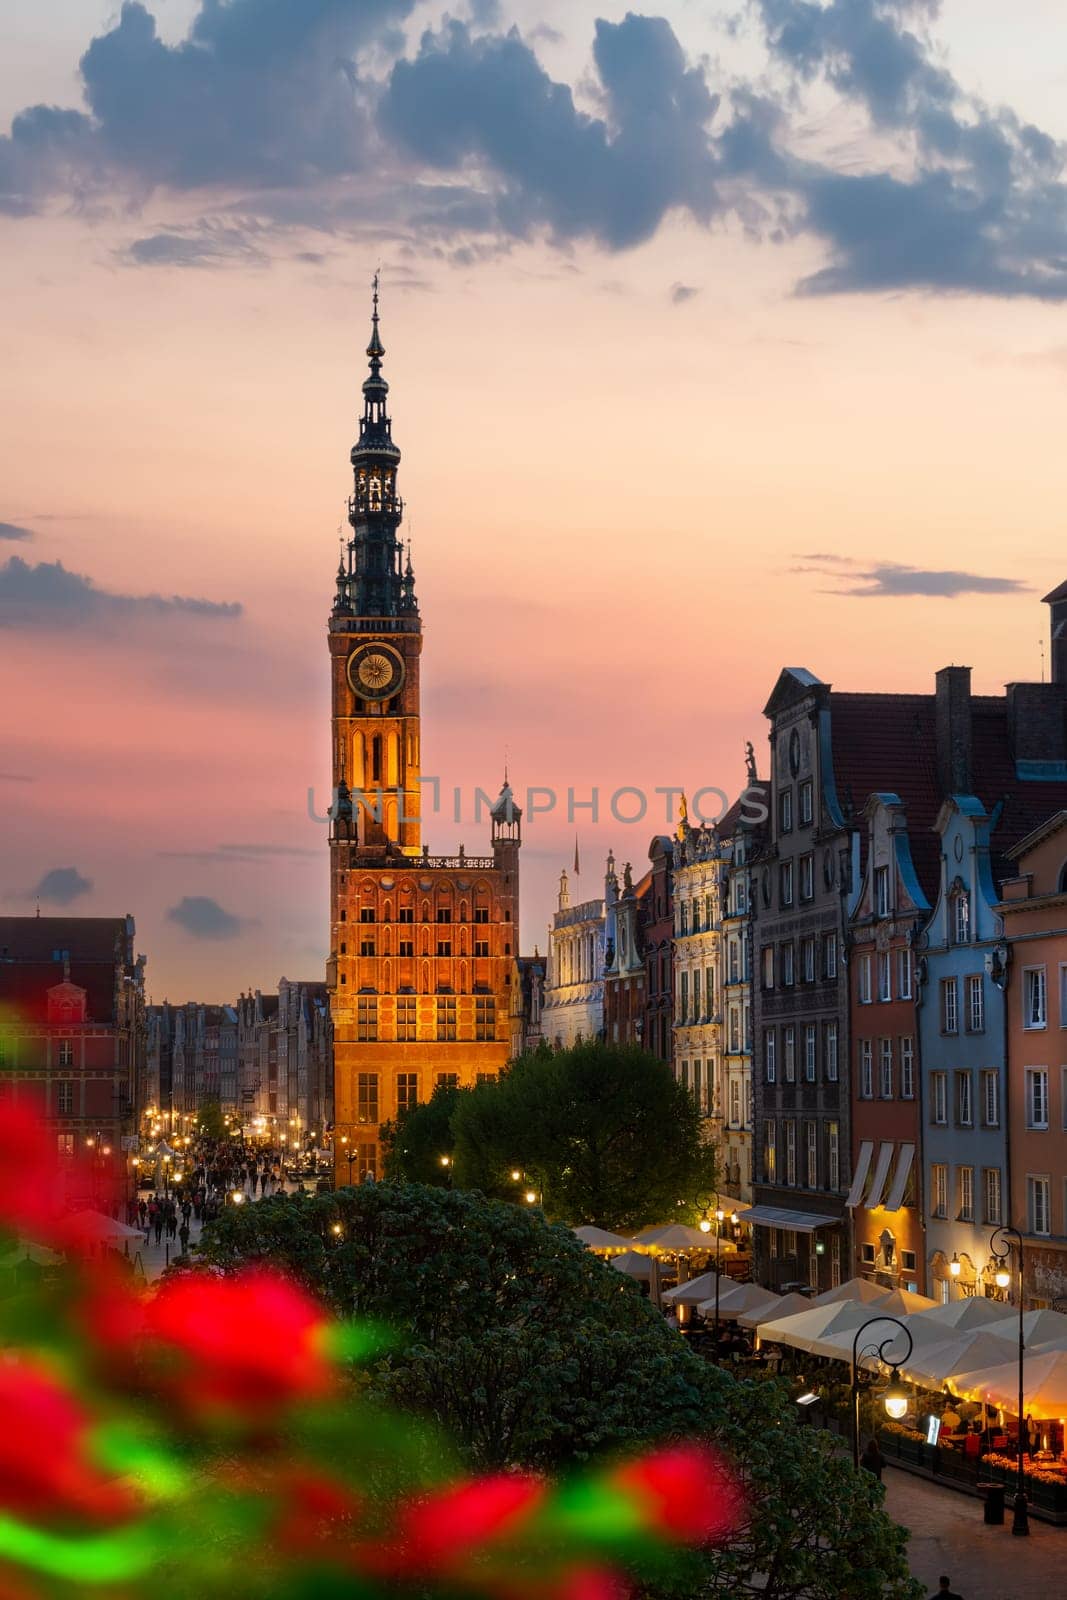 Main Town Hall in the old city of Gdansk, Poland